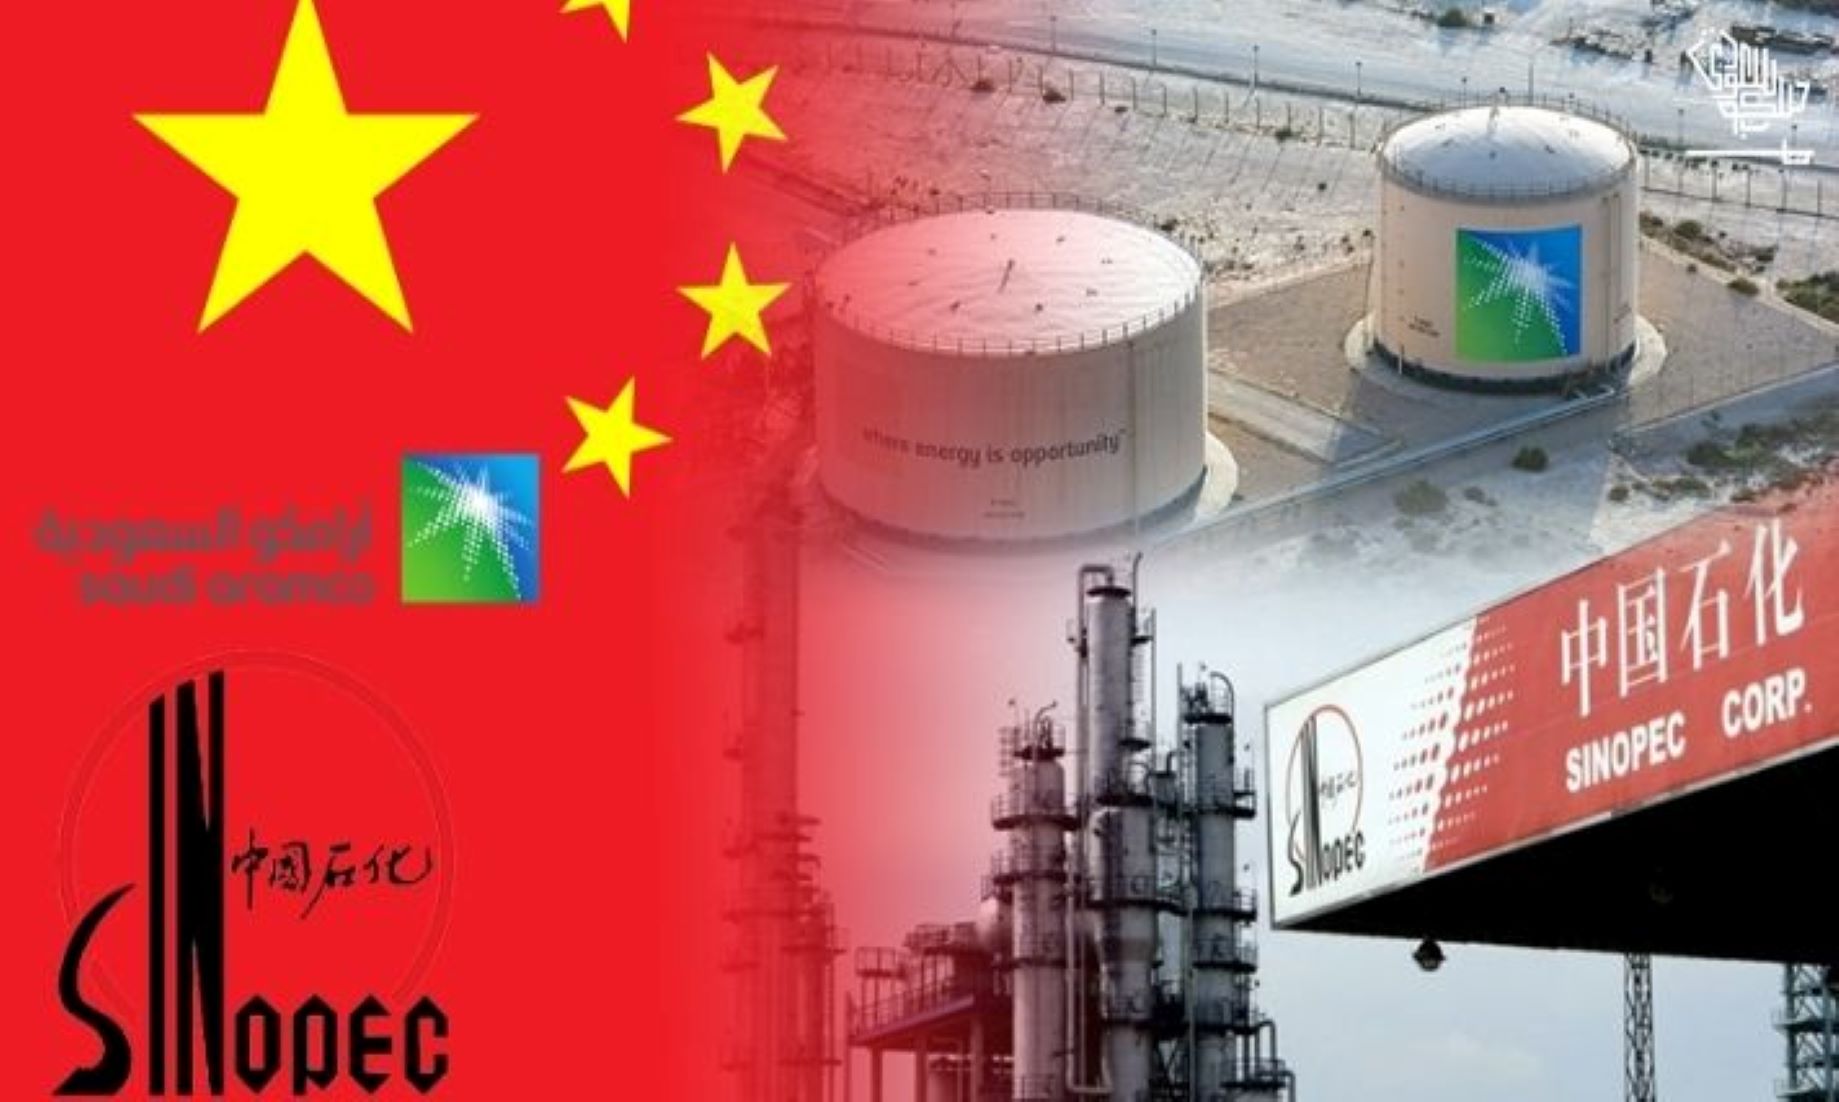 Aramco, Sinopec Signed MoU To Deepen Wide-Ranging Cooperation Via Joint Ventures